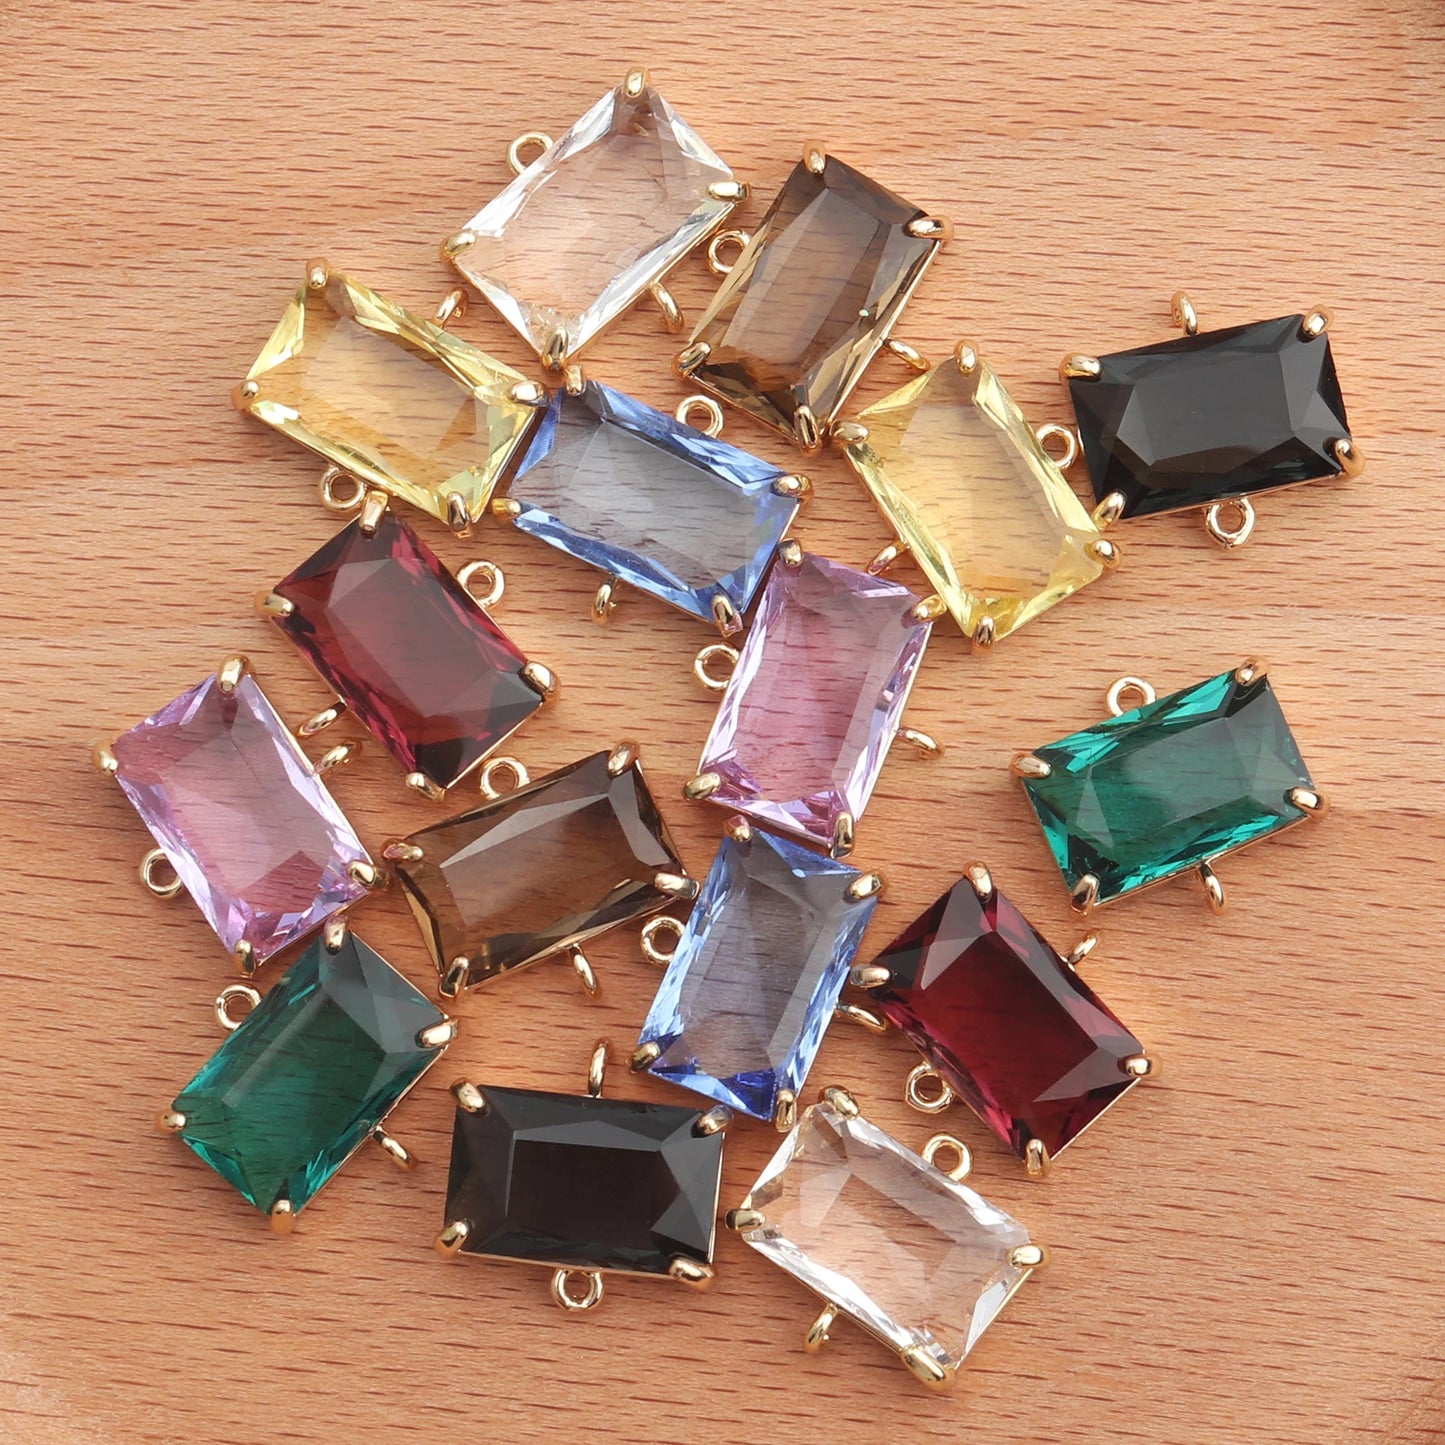 GUFEATHER M430,jewelry accessories,glass pendant,copper,jewelry findings,hand made,charms,diy earring pendants,10pcs/lot